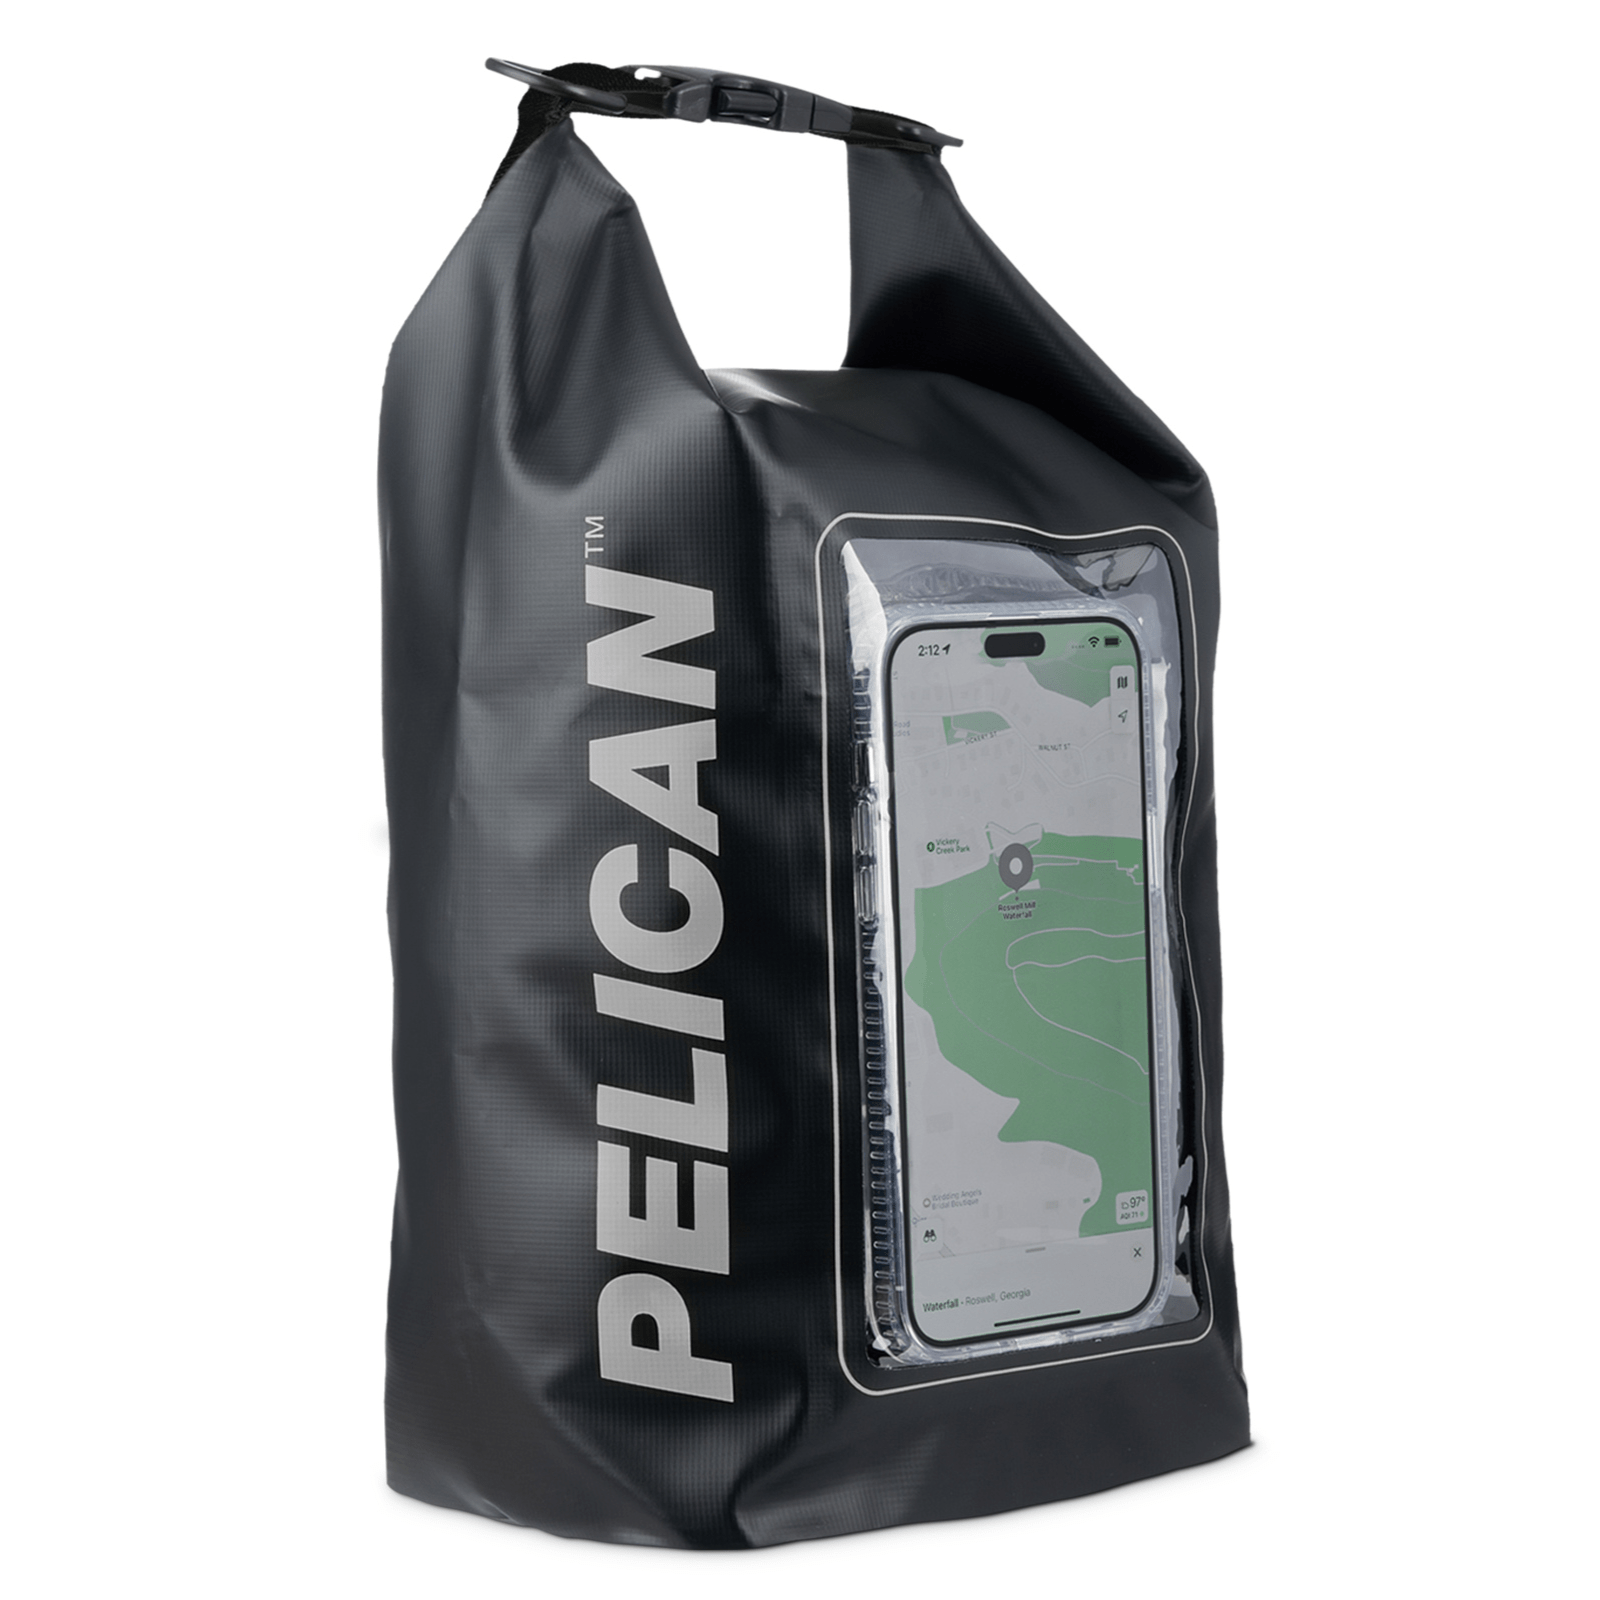 Pelican Marine Water Resistant 2L Dry Bag with Built-In Phone Pouch -  Stealth Black